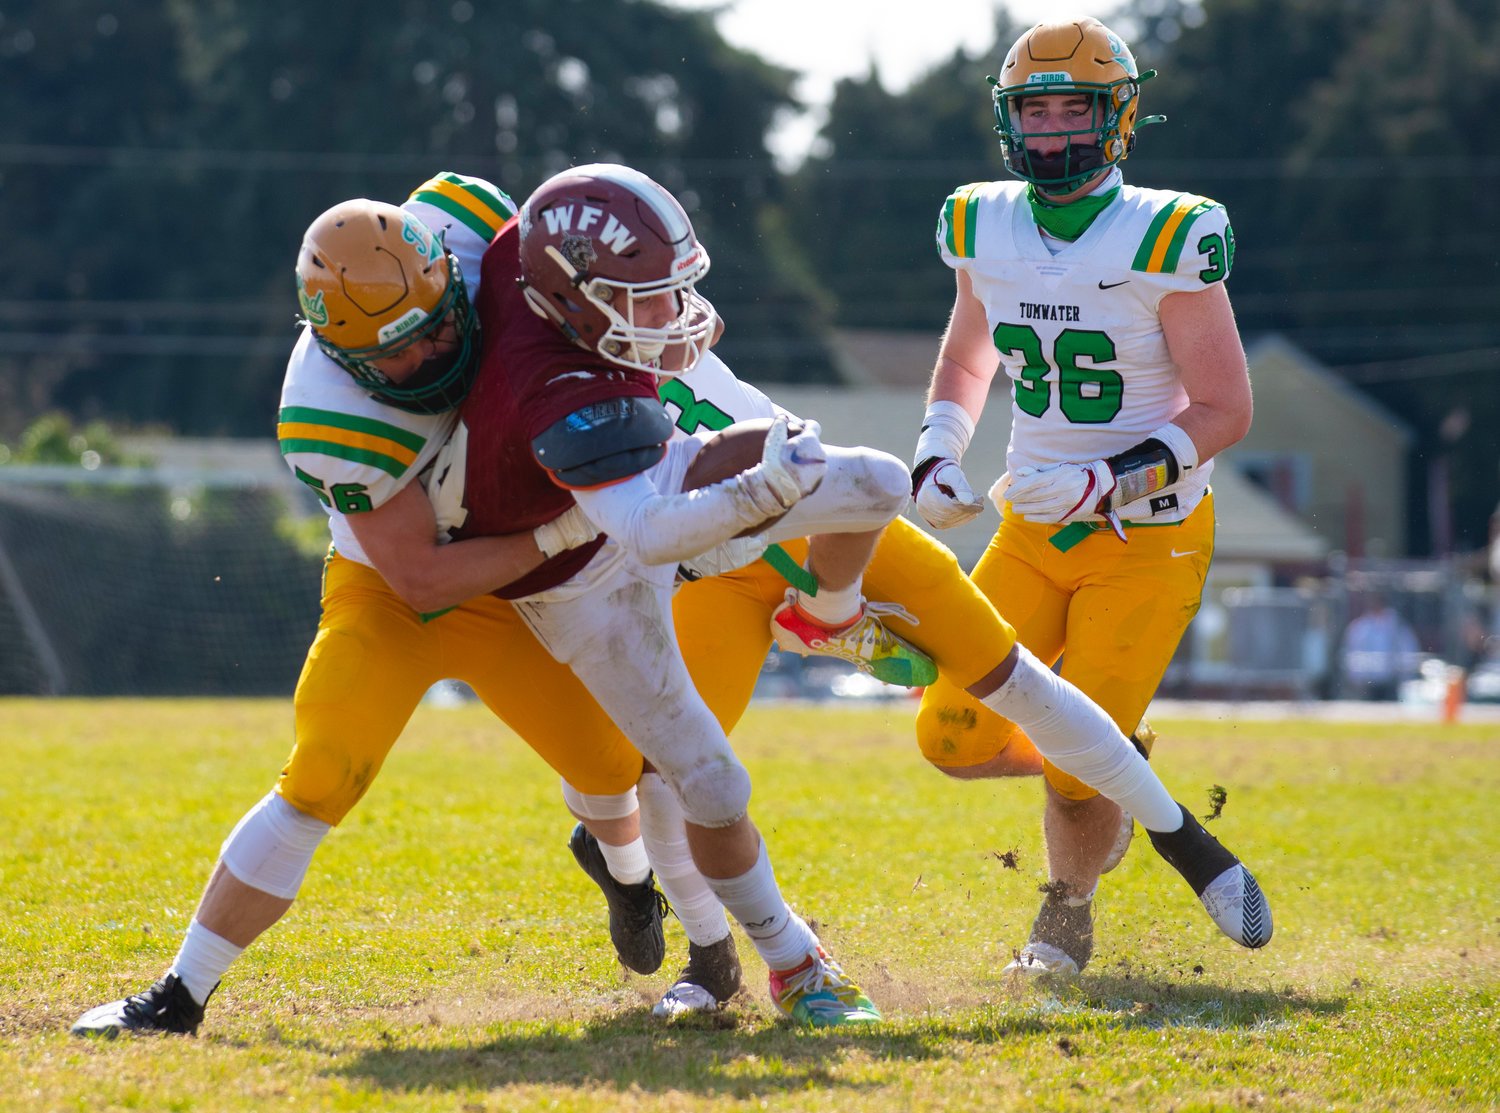 W.F. West's Cade Haller gets brought down by a Tumwater defensive lineman on Saturday.